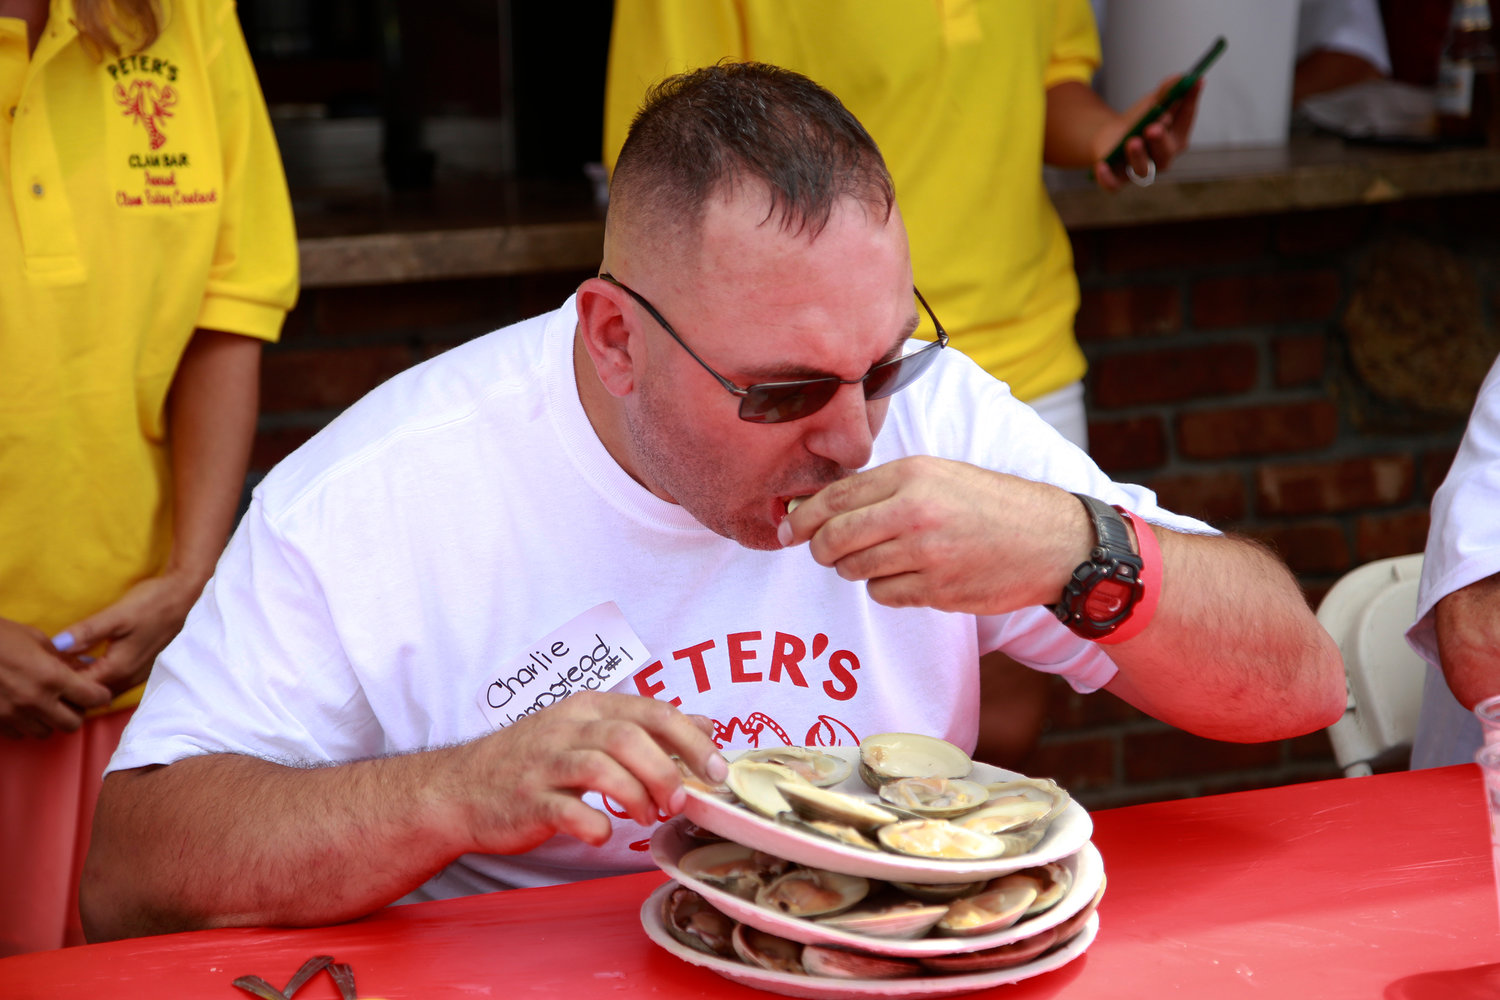 New clam champ crowned at Peter's Clam Bar's annual in Island Park | Herald Community Newspapers | liherald.com